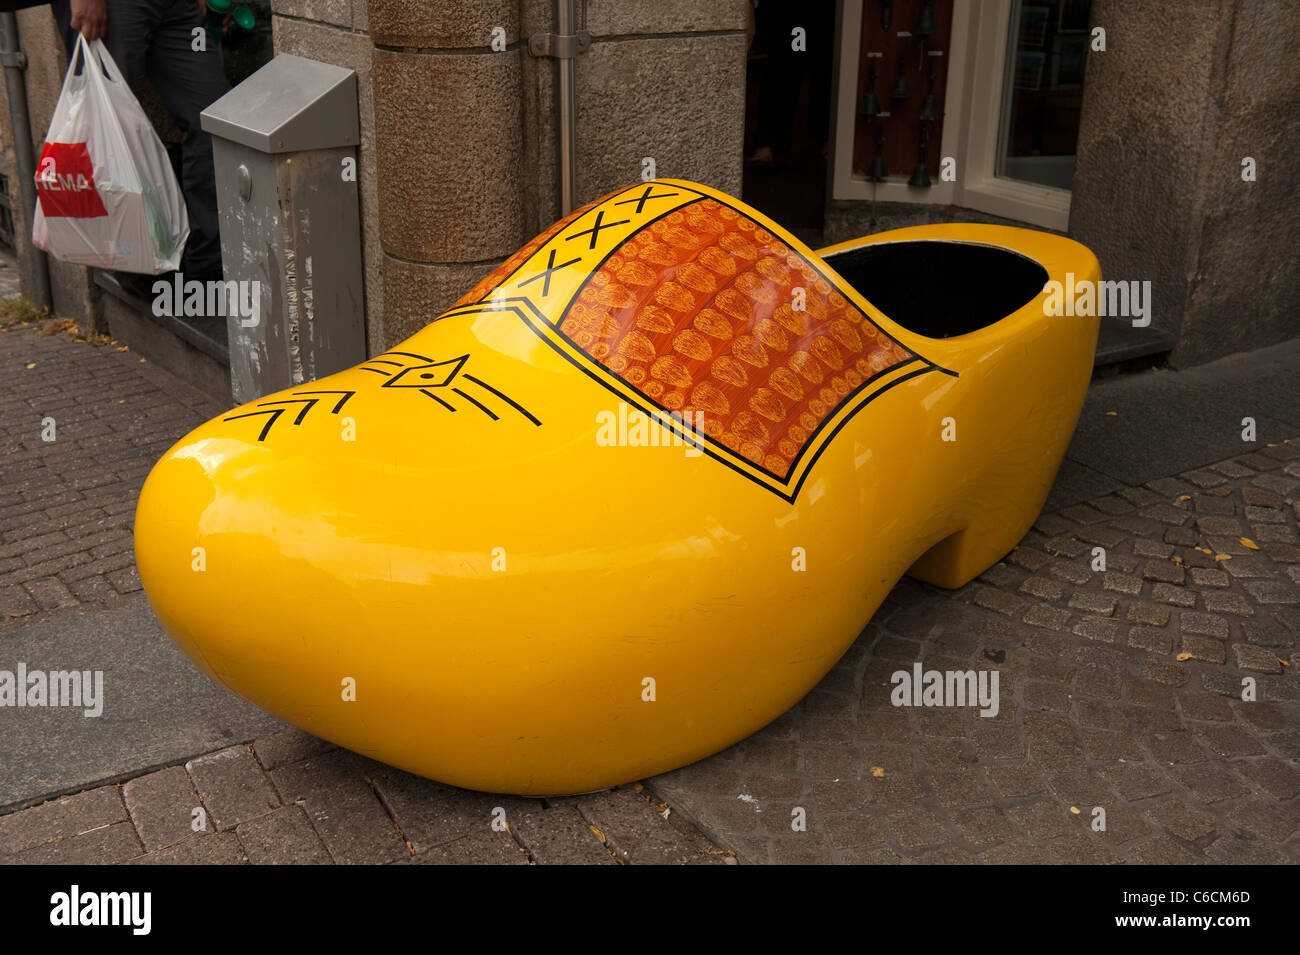 Giant Wooden Clog Amsterdam High 